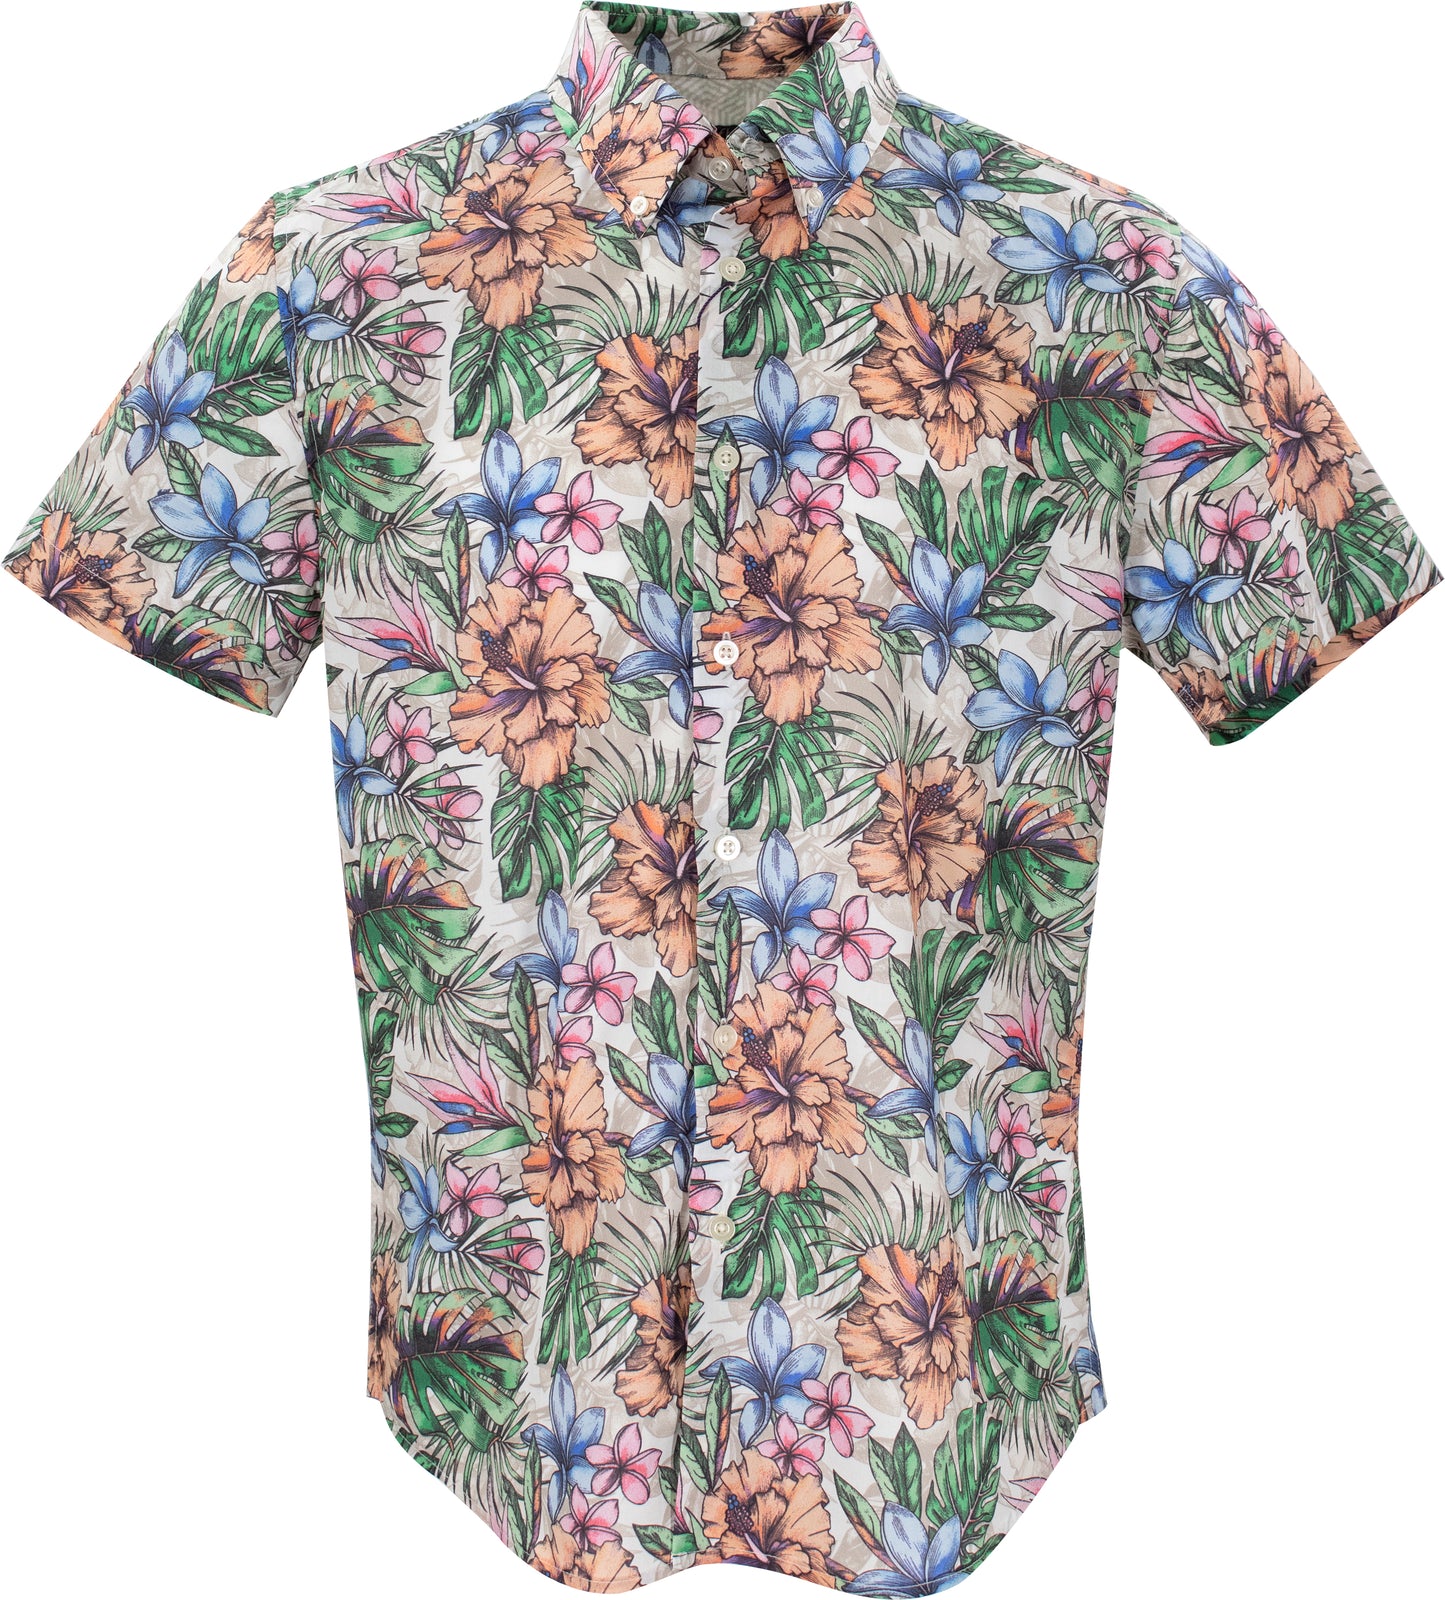 TIM COLORFUL FLORAL IVORY